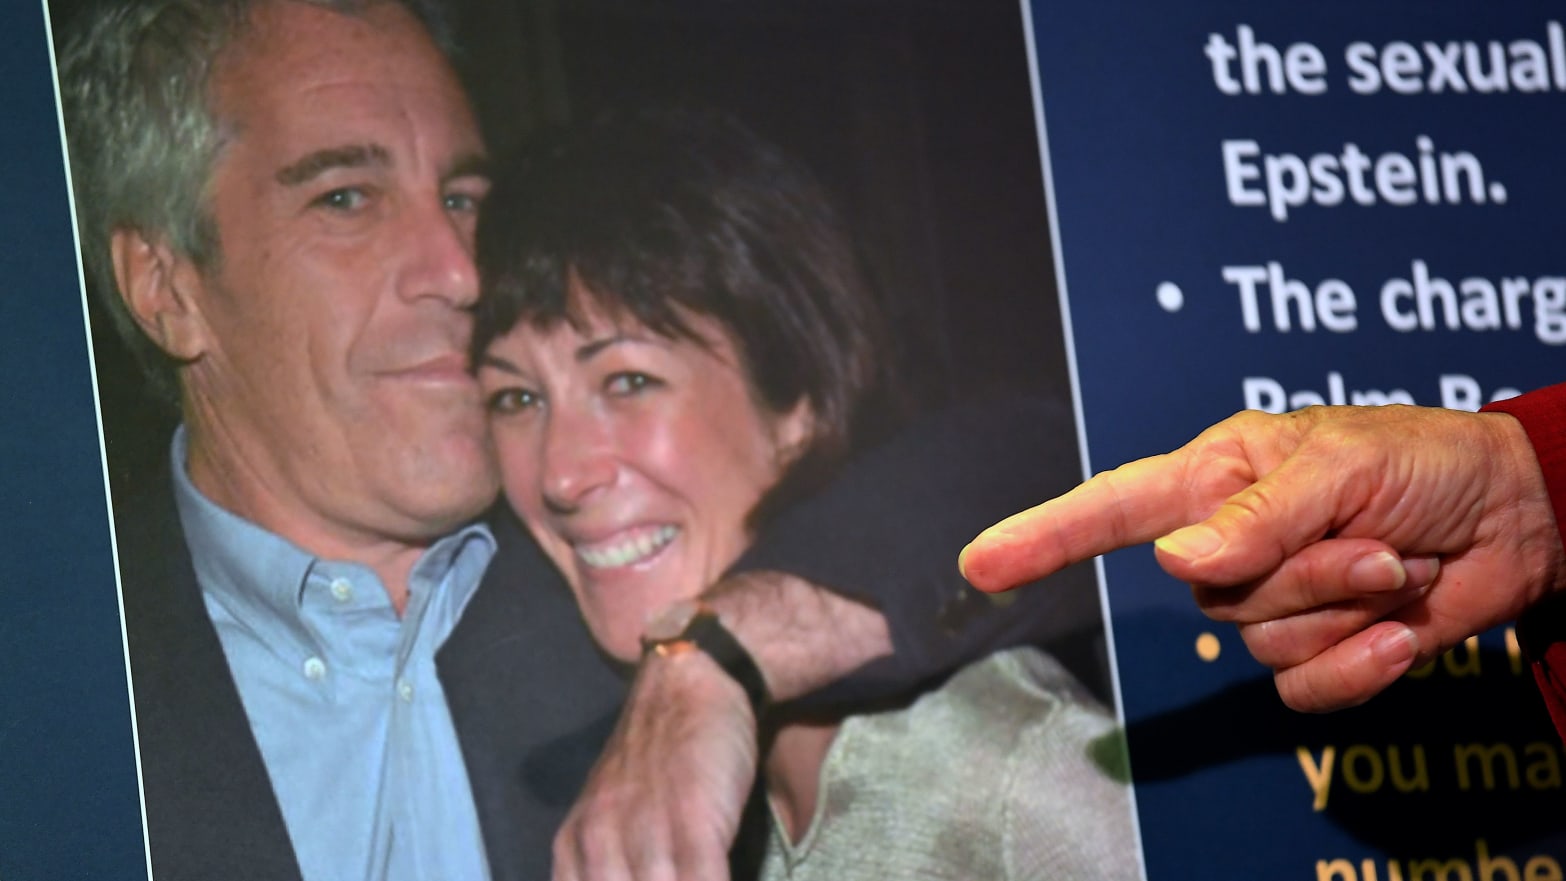 Jeffrey Epstein and Ghislaine Maxwell Forced Young Girls Into an Orgy, Court Records